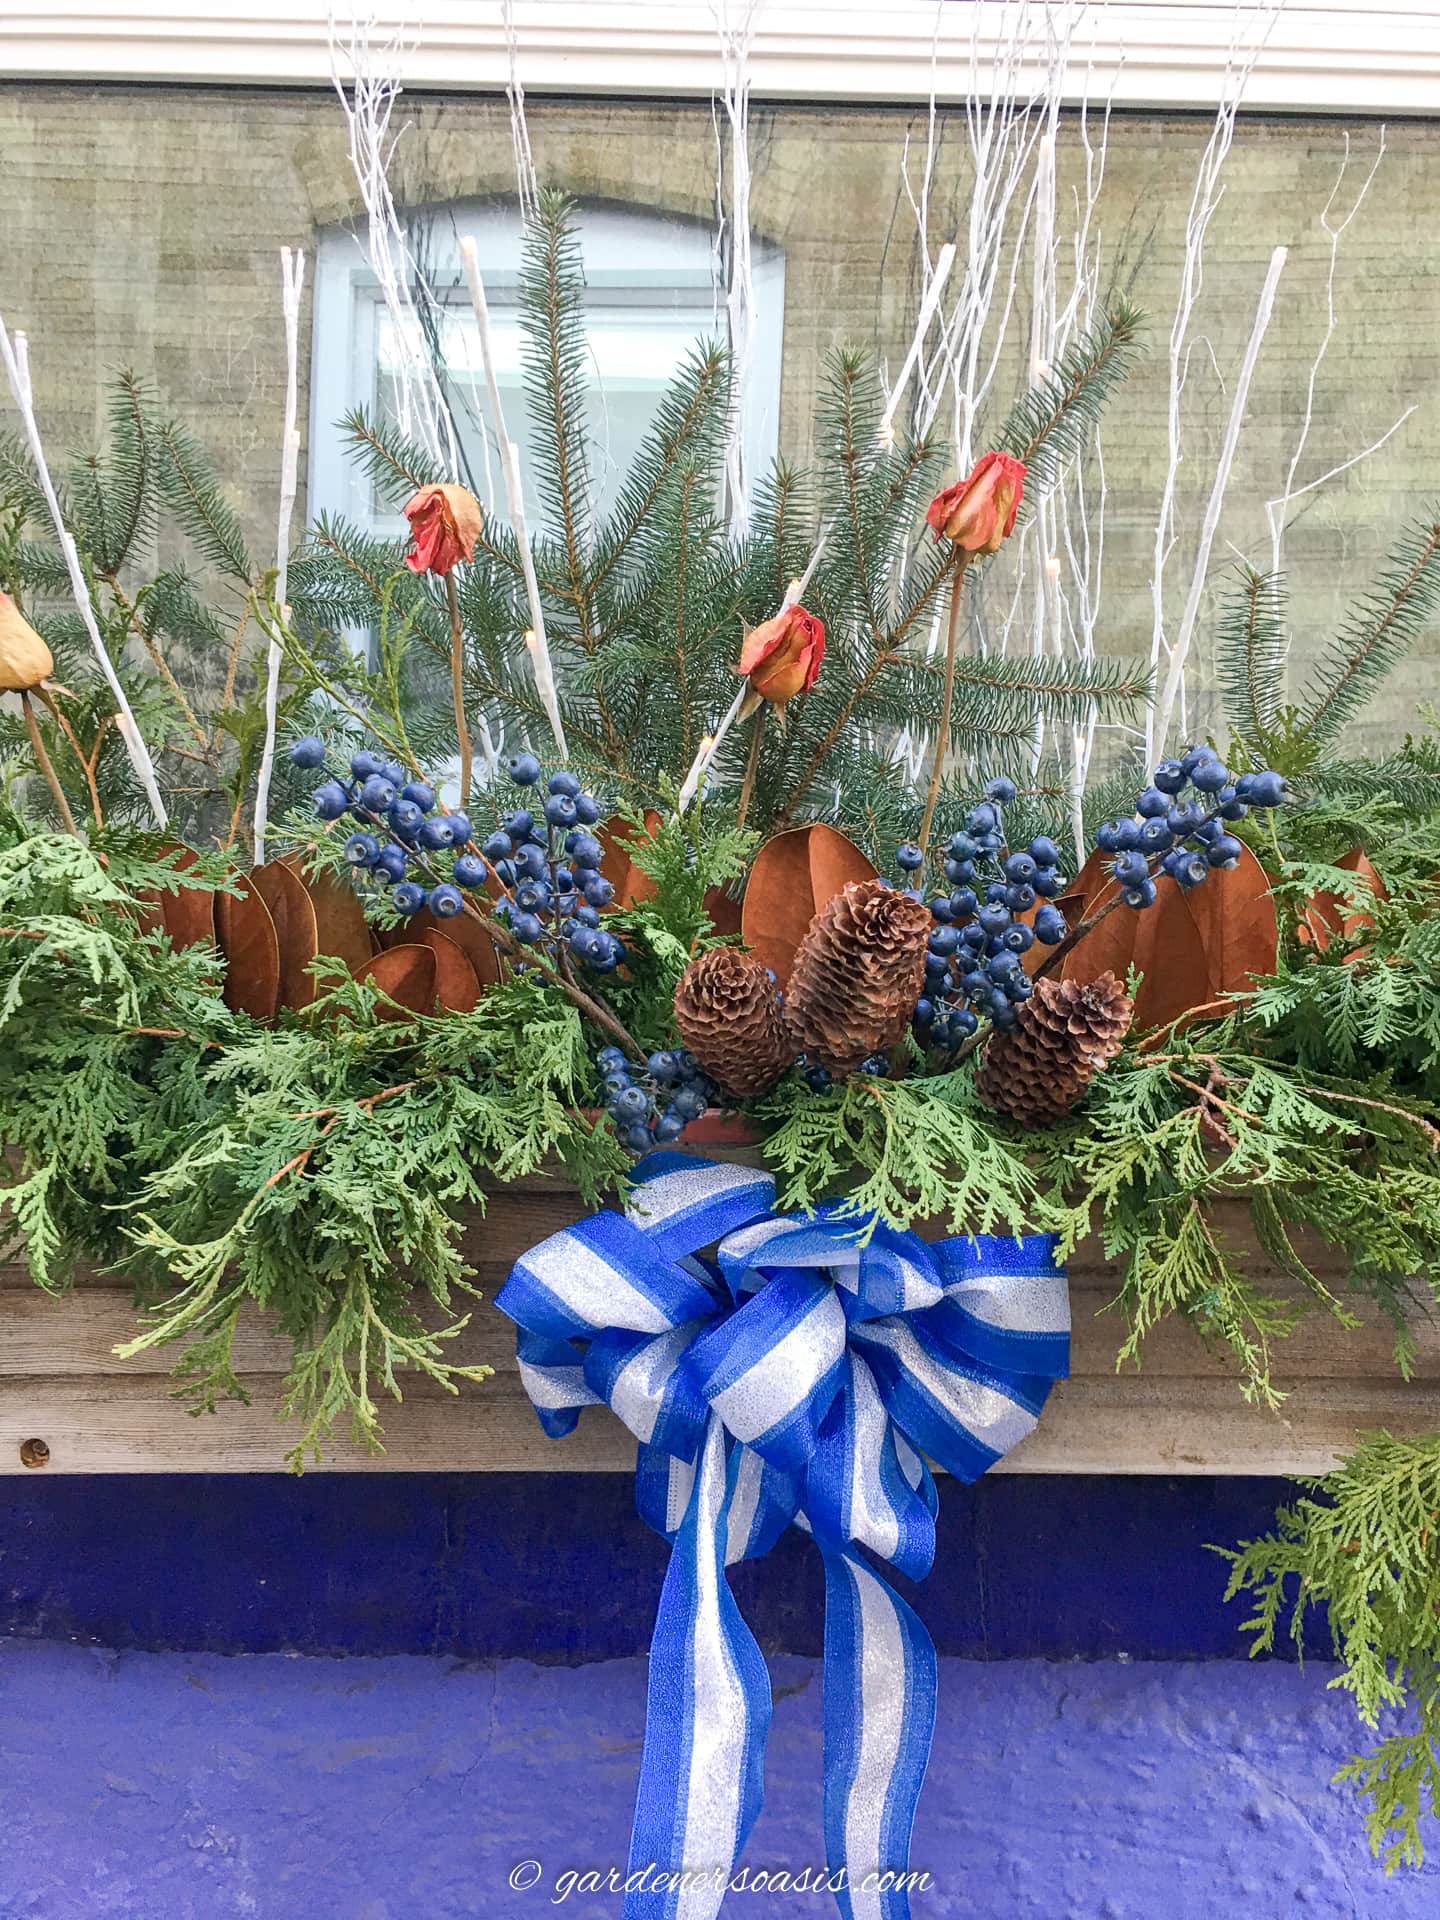 A winter window box decorated with evergreens, pine cones, dried roses, blue berries, and a blue ribbon.